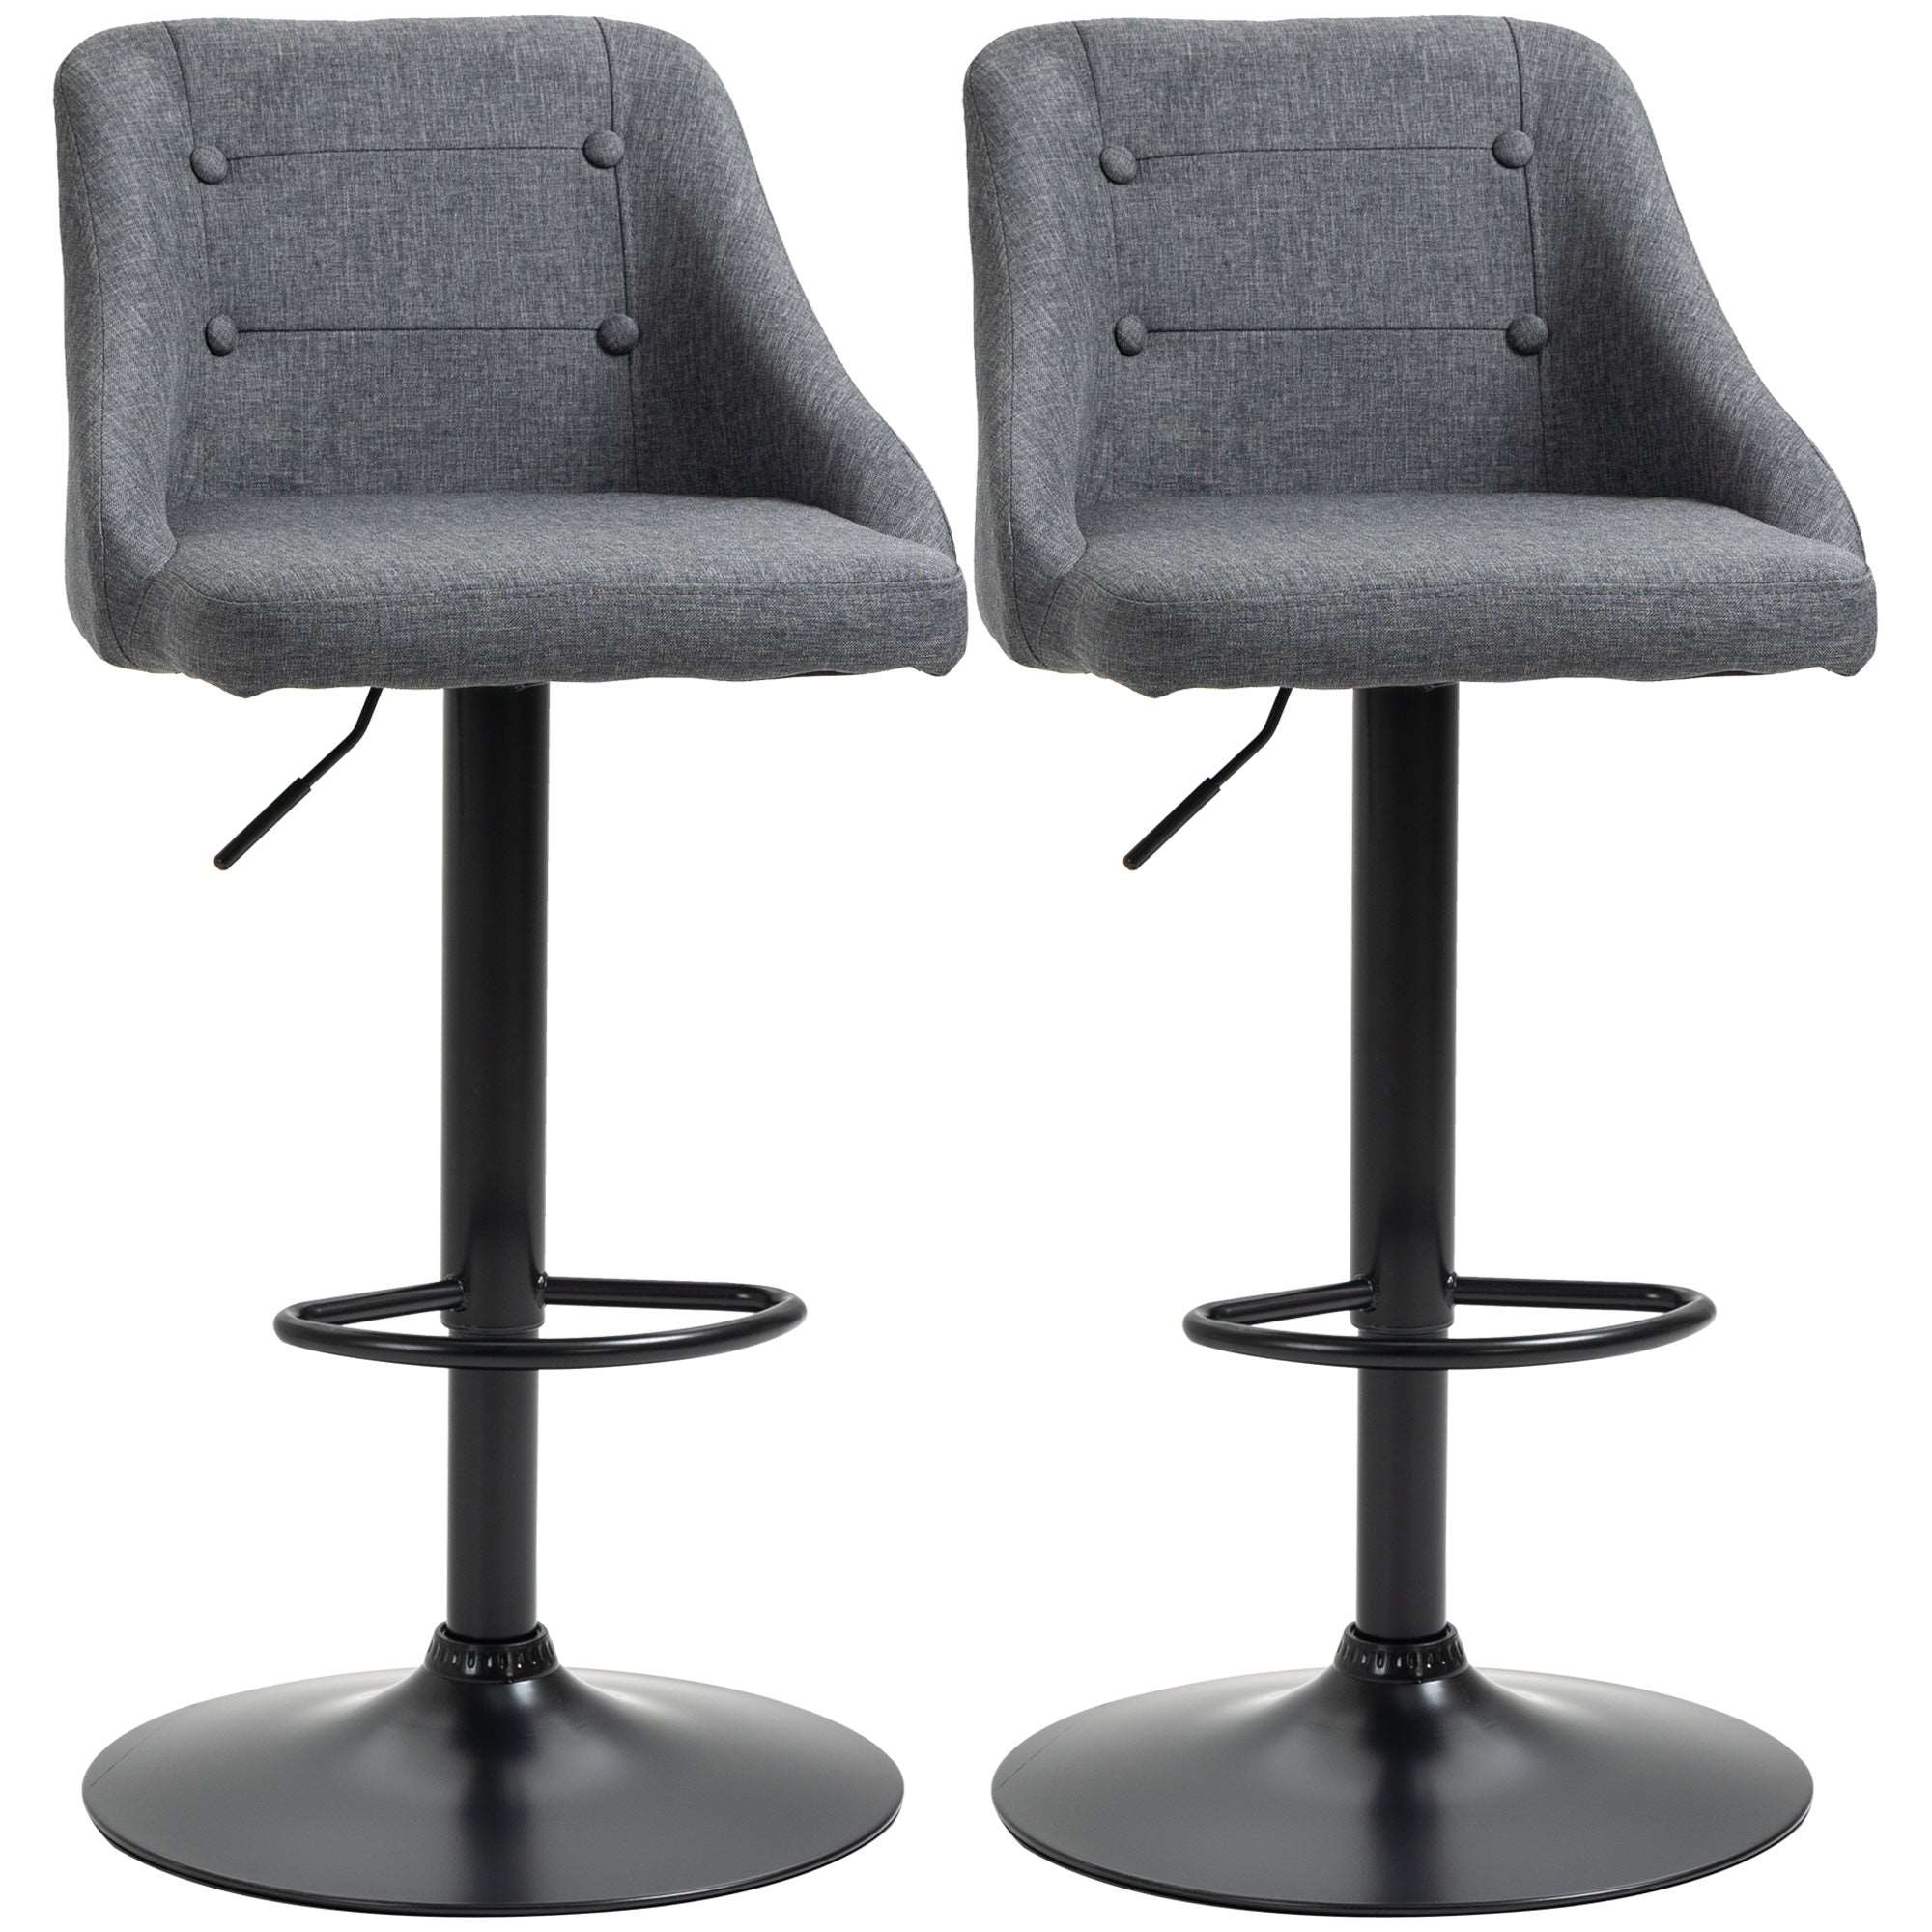 Modern Adjustable Bar Stools Set of 2, Swivel Fabric Barstools with Footrest, Armrests and Back, for Kitchen Counter and Dining Room, Dark Grey  AOSOM   